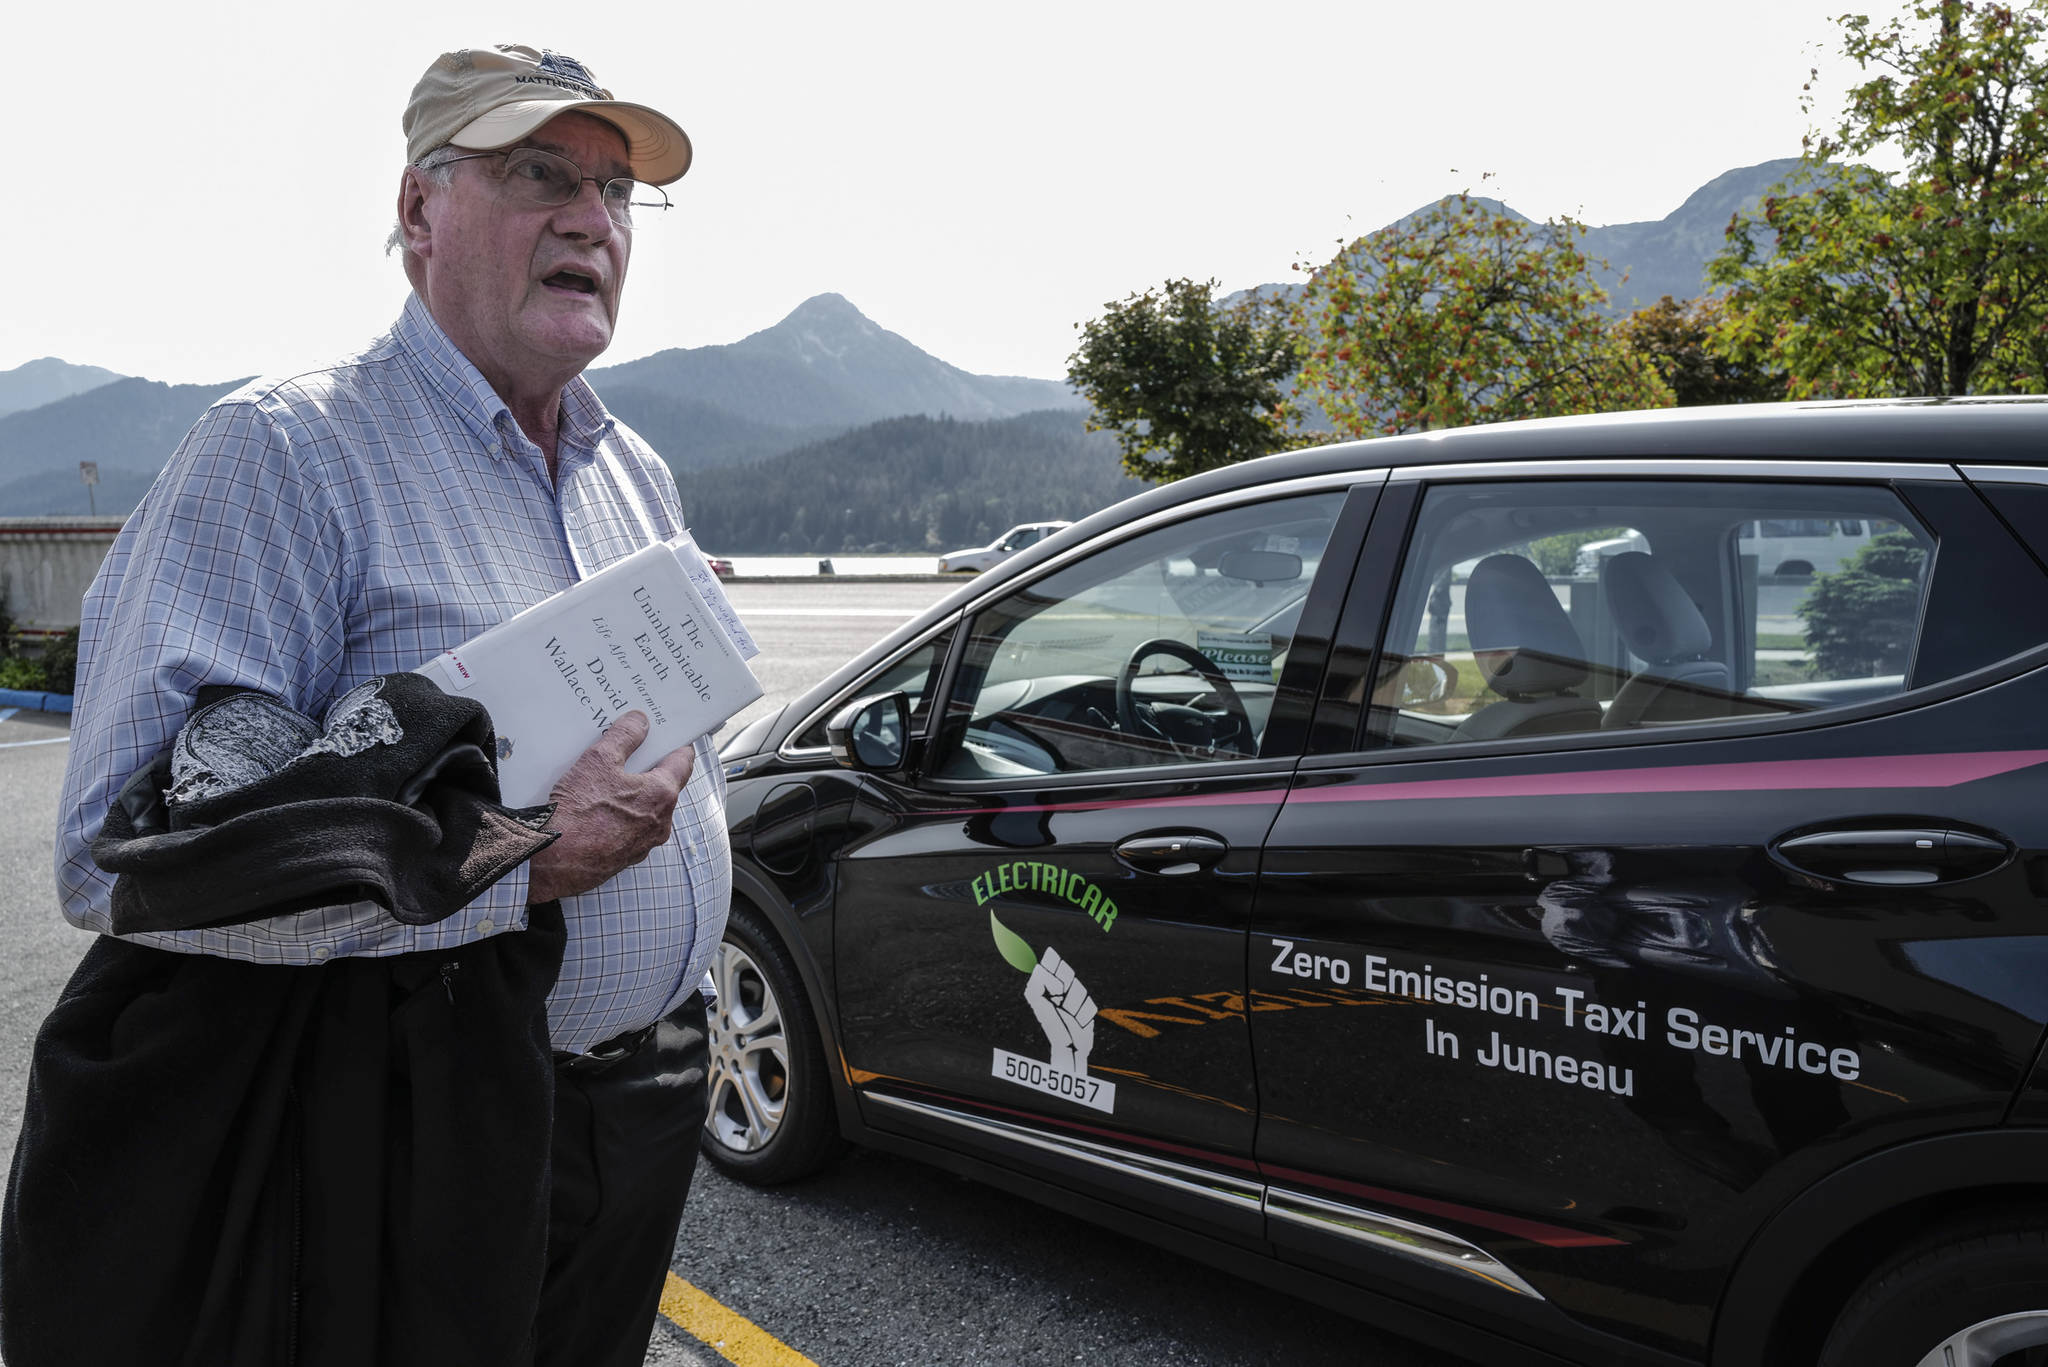 Mike Orford stands next to his brand new 2019 Chevy Bolt Electric Vehicle on Monday, Aug. 12, 2019. Orford, who has been a taxi driver for EverGreen Taxi, plans to put into zero emission vehicle into service to reduce costs and lead the way for a more sustainable way of life. (MIchael Penn | Juneau Empire)